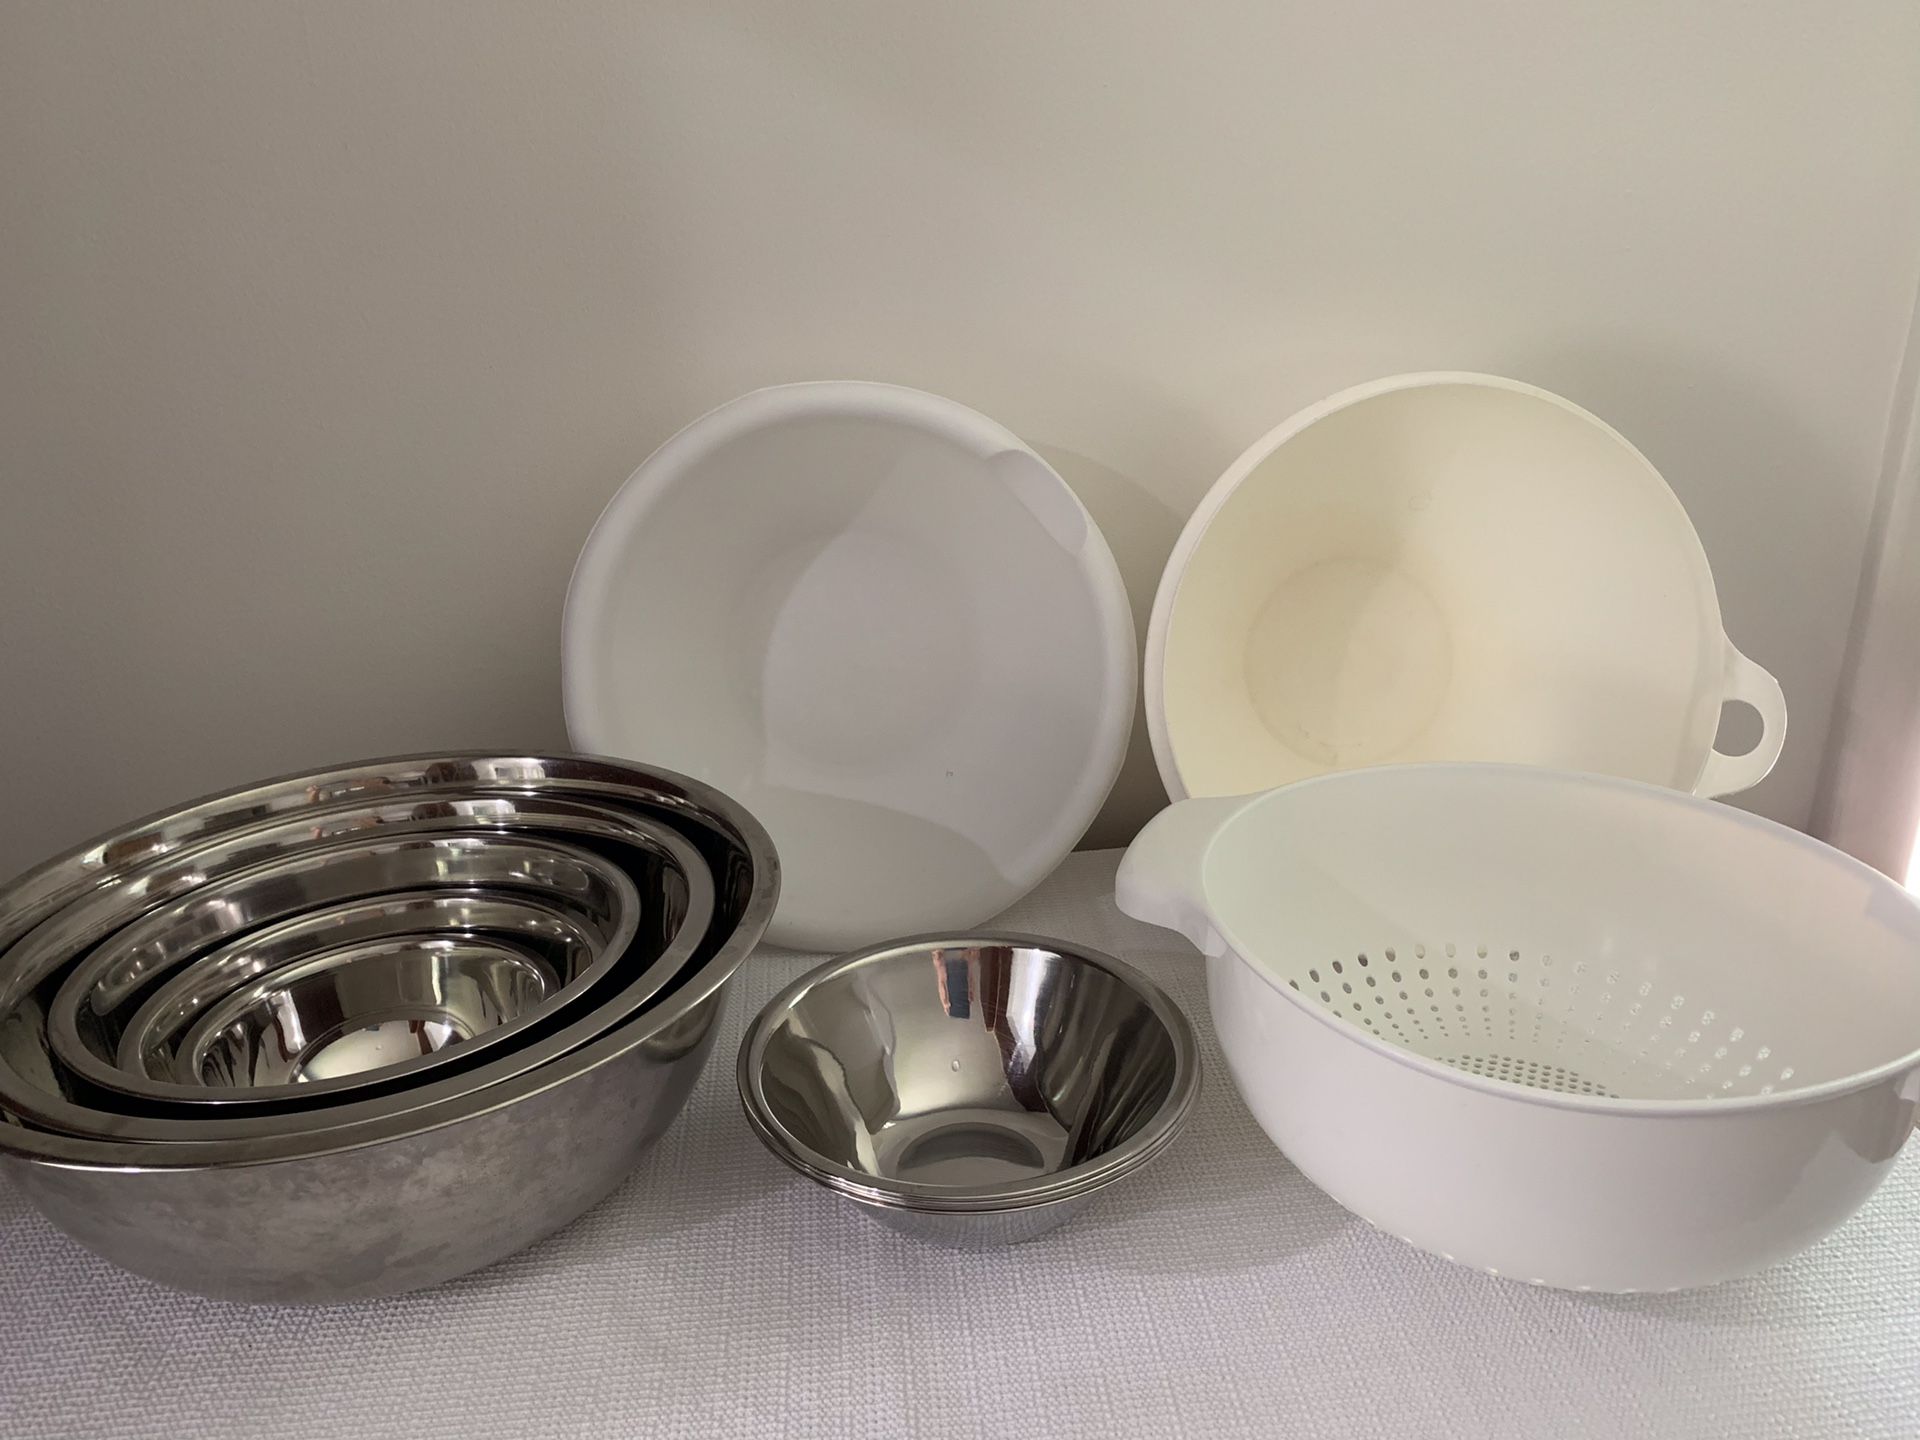 Set of 9 metal stainless steel mixing bowls, 2 large plastic mixing bowls and a large plastic colander.